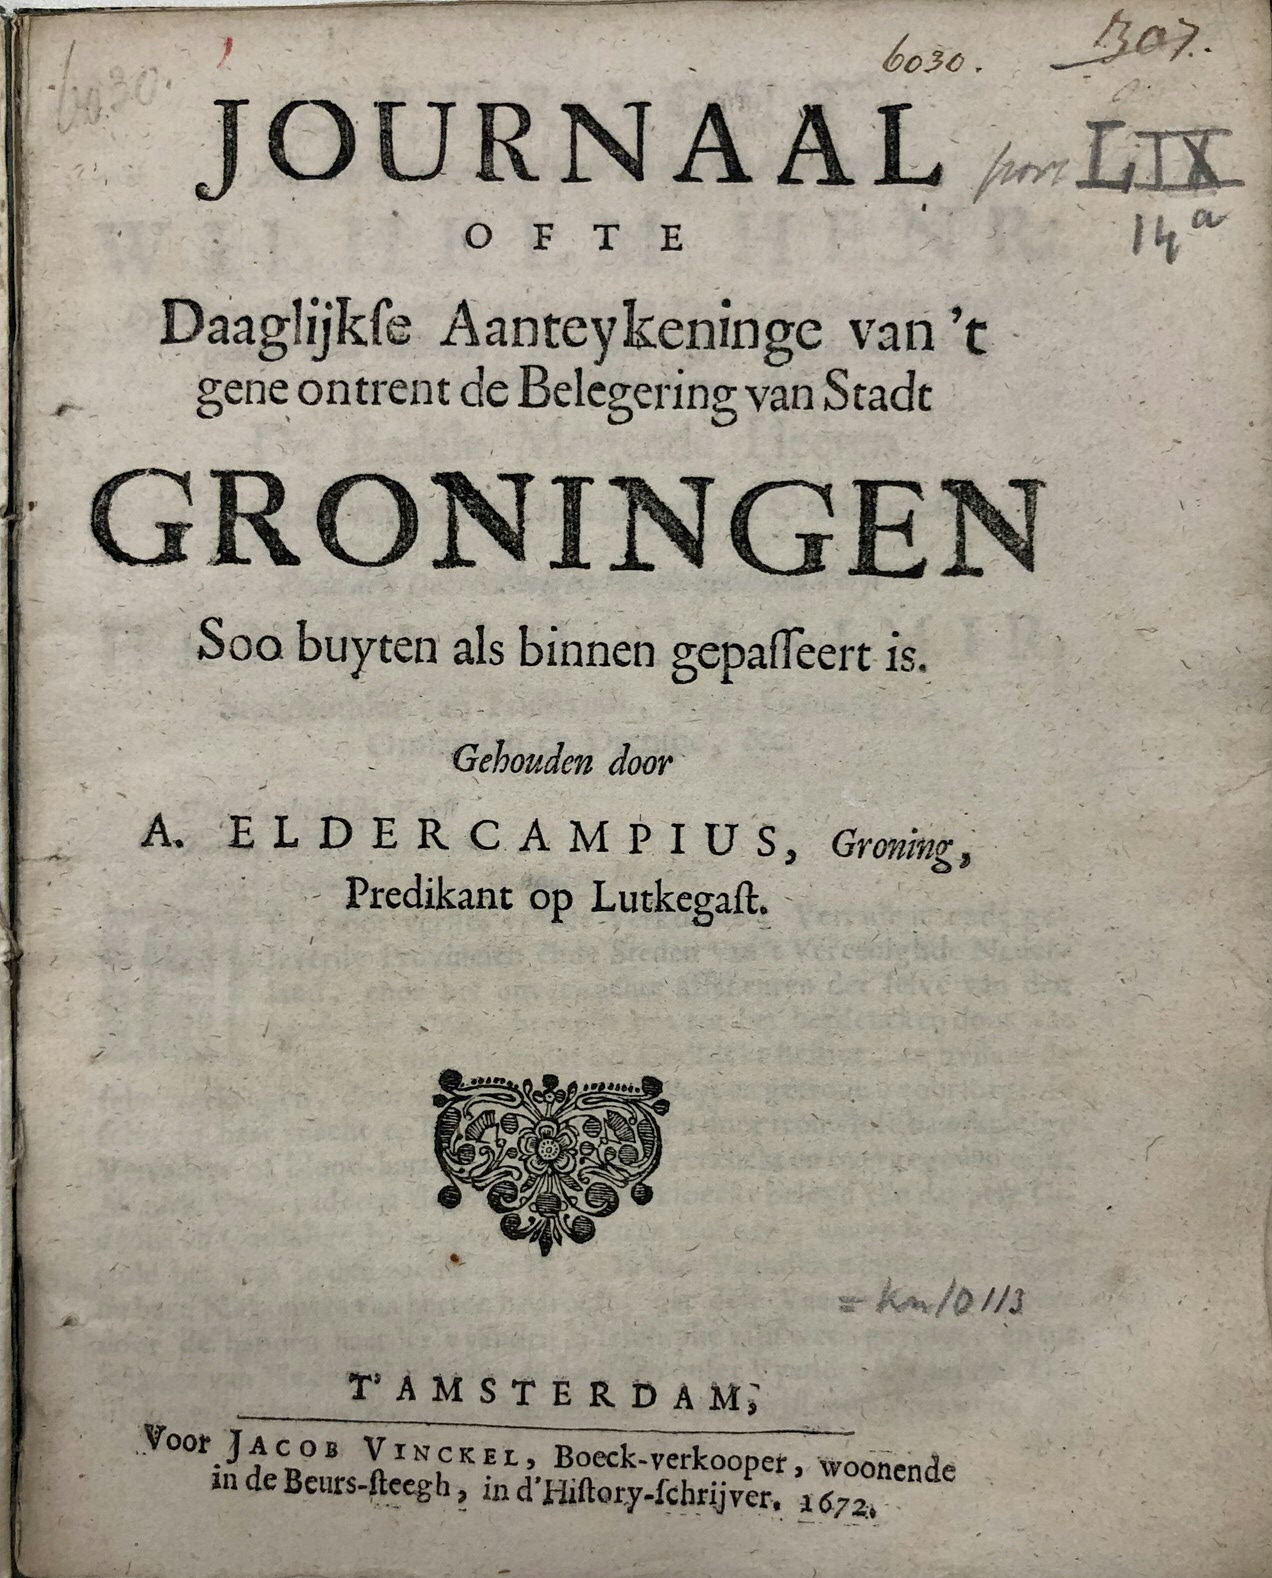 Ill. 3: Andreas Eldercamp, ‘Journal of observations of events in the Siege of the of city Groningen, as occurred within and outside the city walls” (Amsterdam: Jacob Vinckel, 1672). UGL, PBG 2827